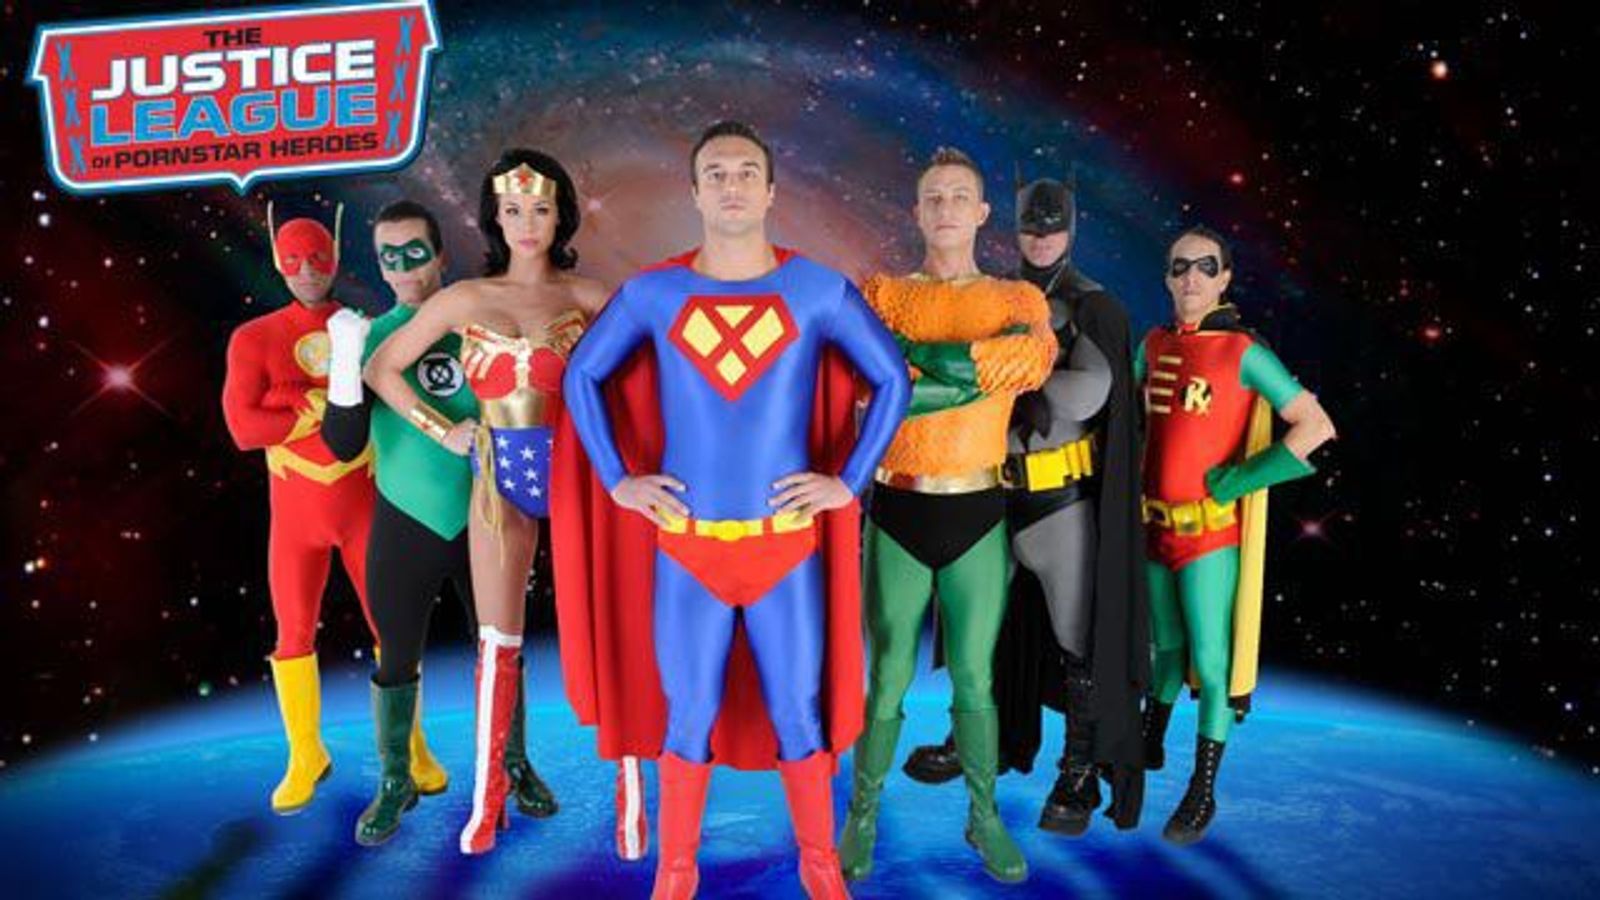 'Justice League of Porn Star Heroes' Tops AVN Top 100